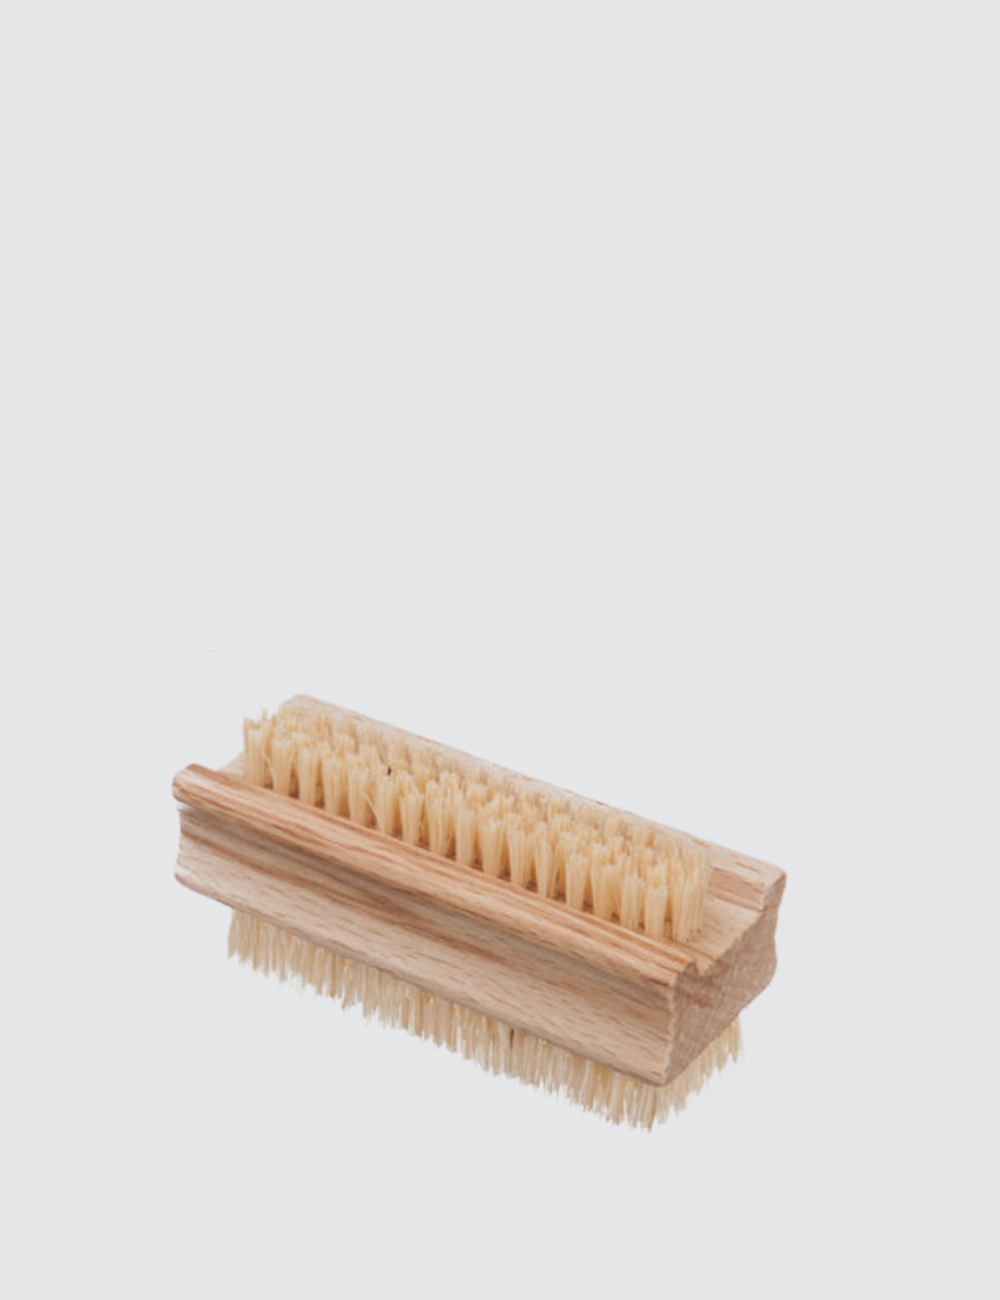 Wooden hand and nail brush